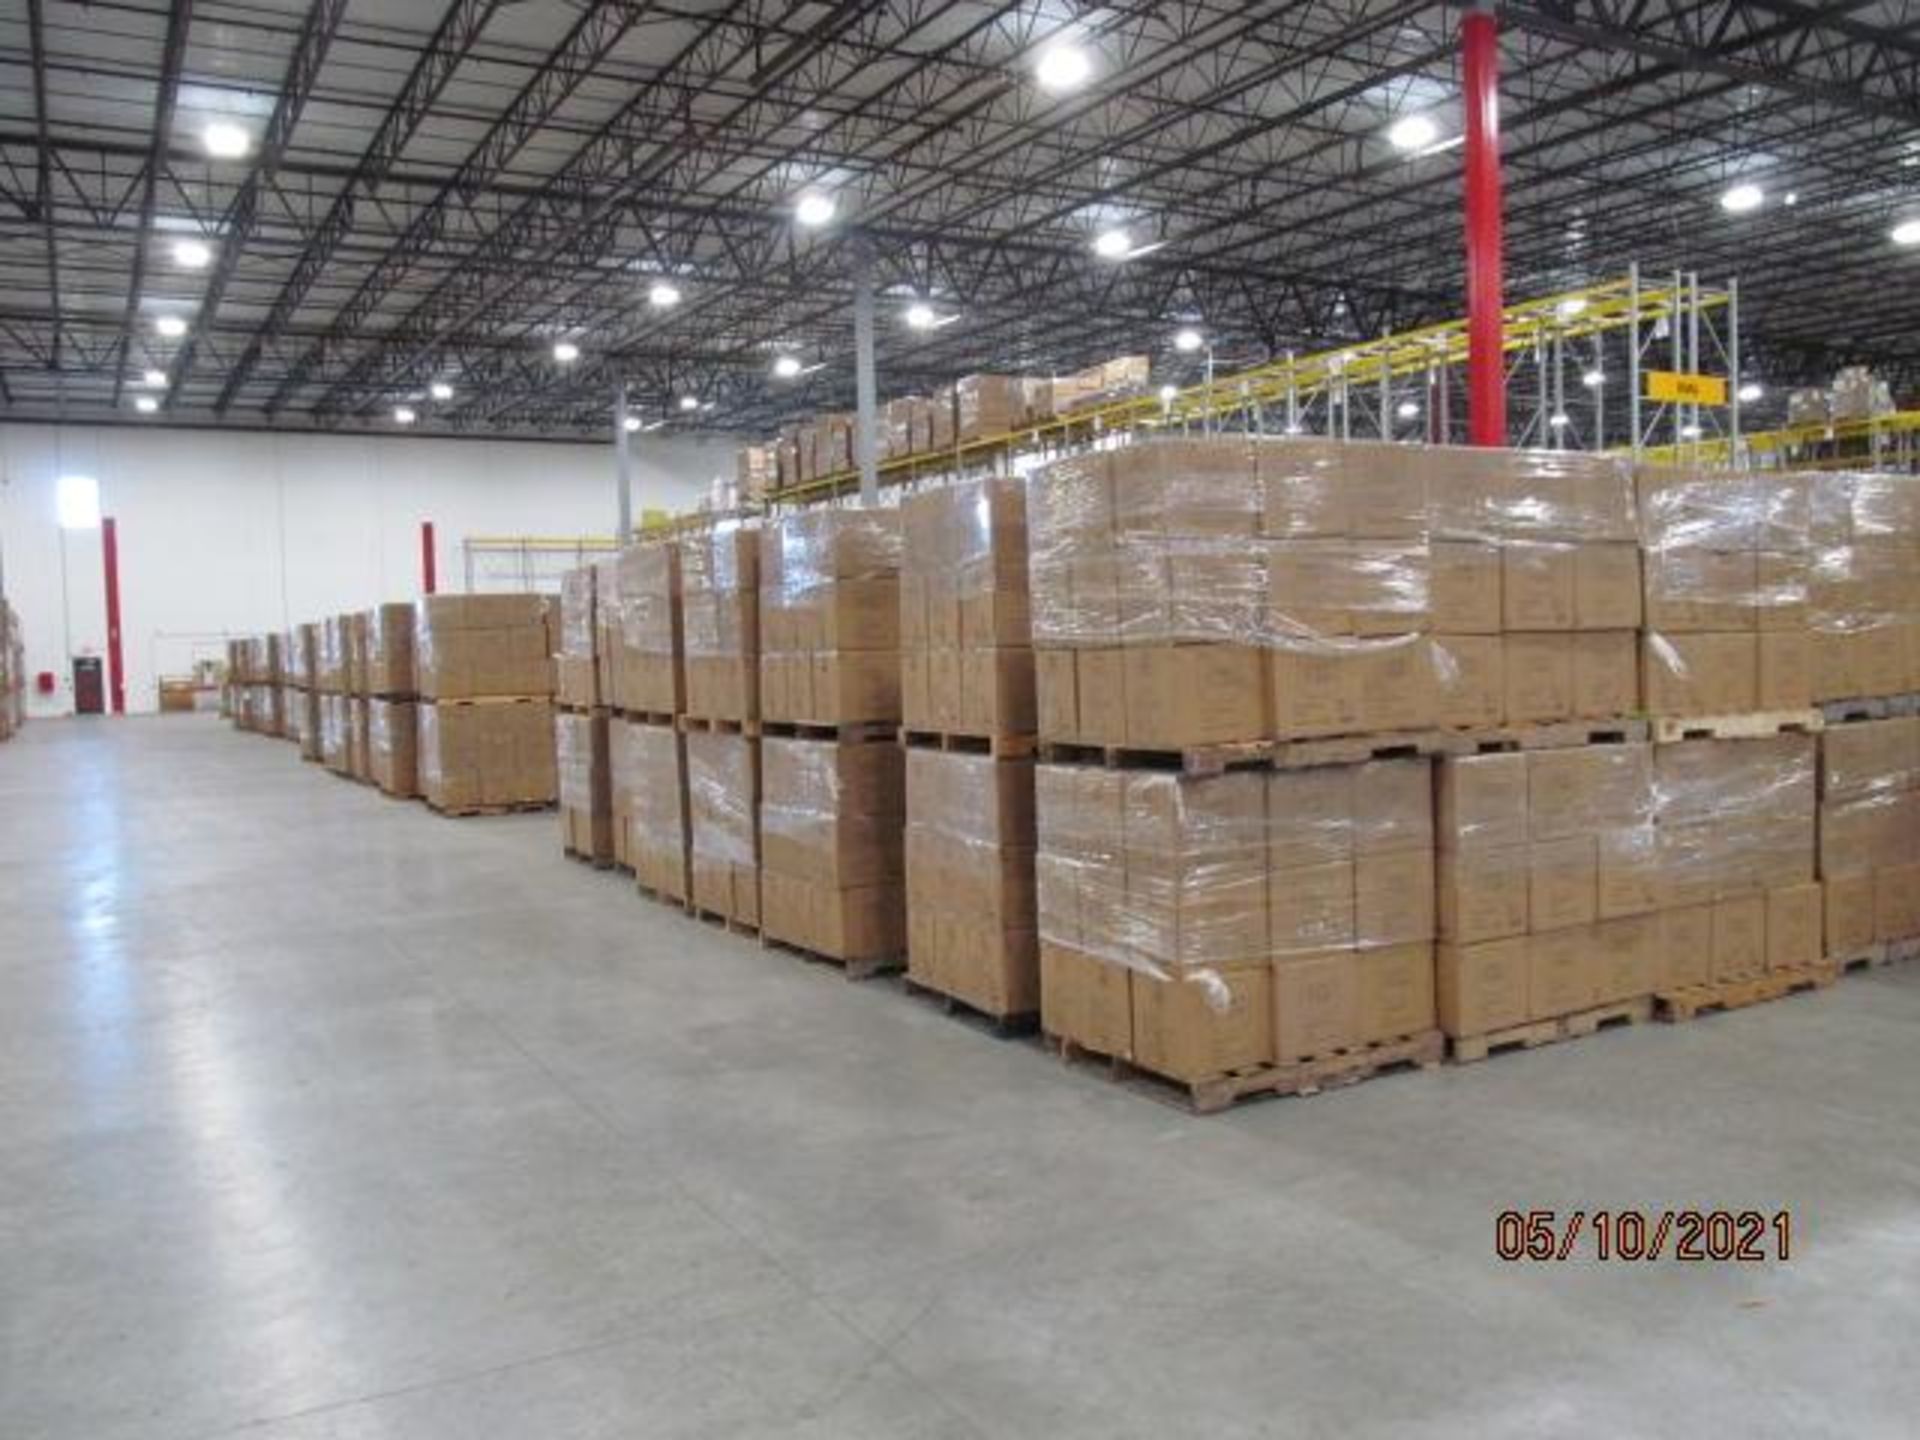 Lot of Waxman Kleen Freak Sanitizing Wipes consisting of 269,568 packages on 416 pallets. Each packa - Image 10 of 11